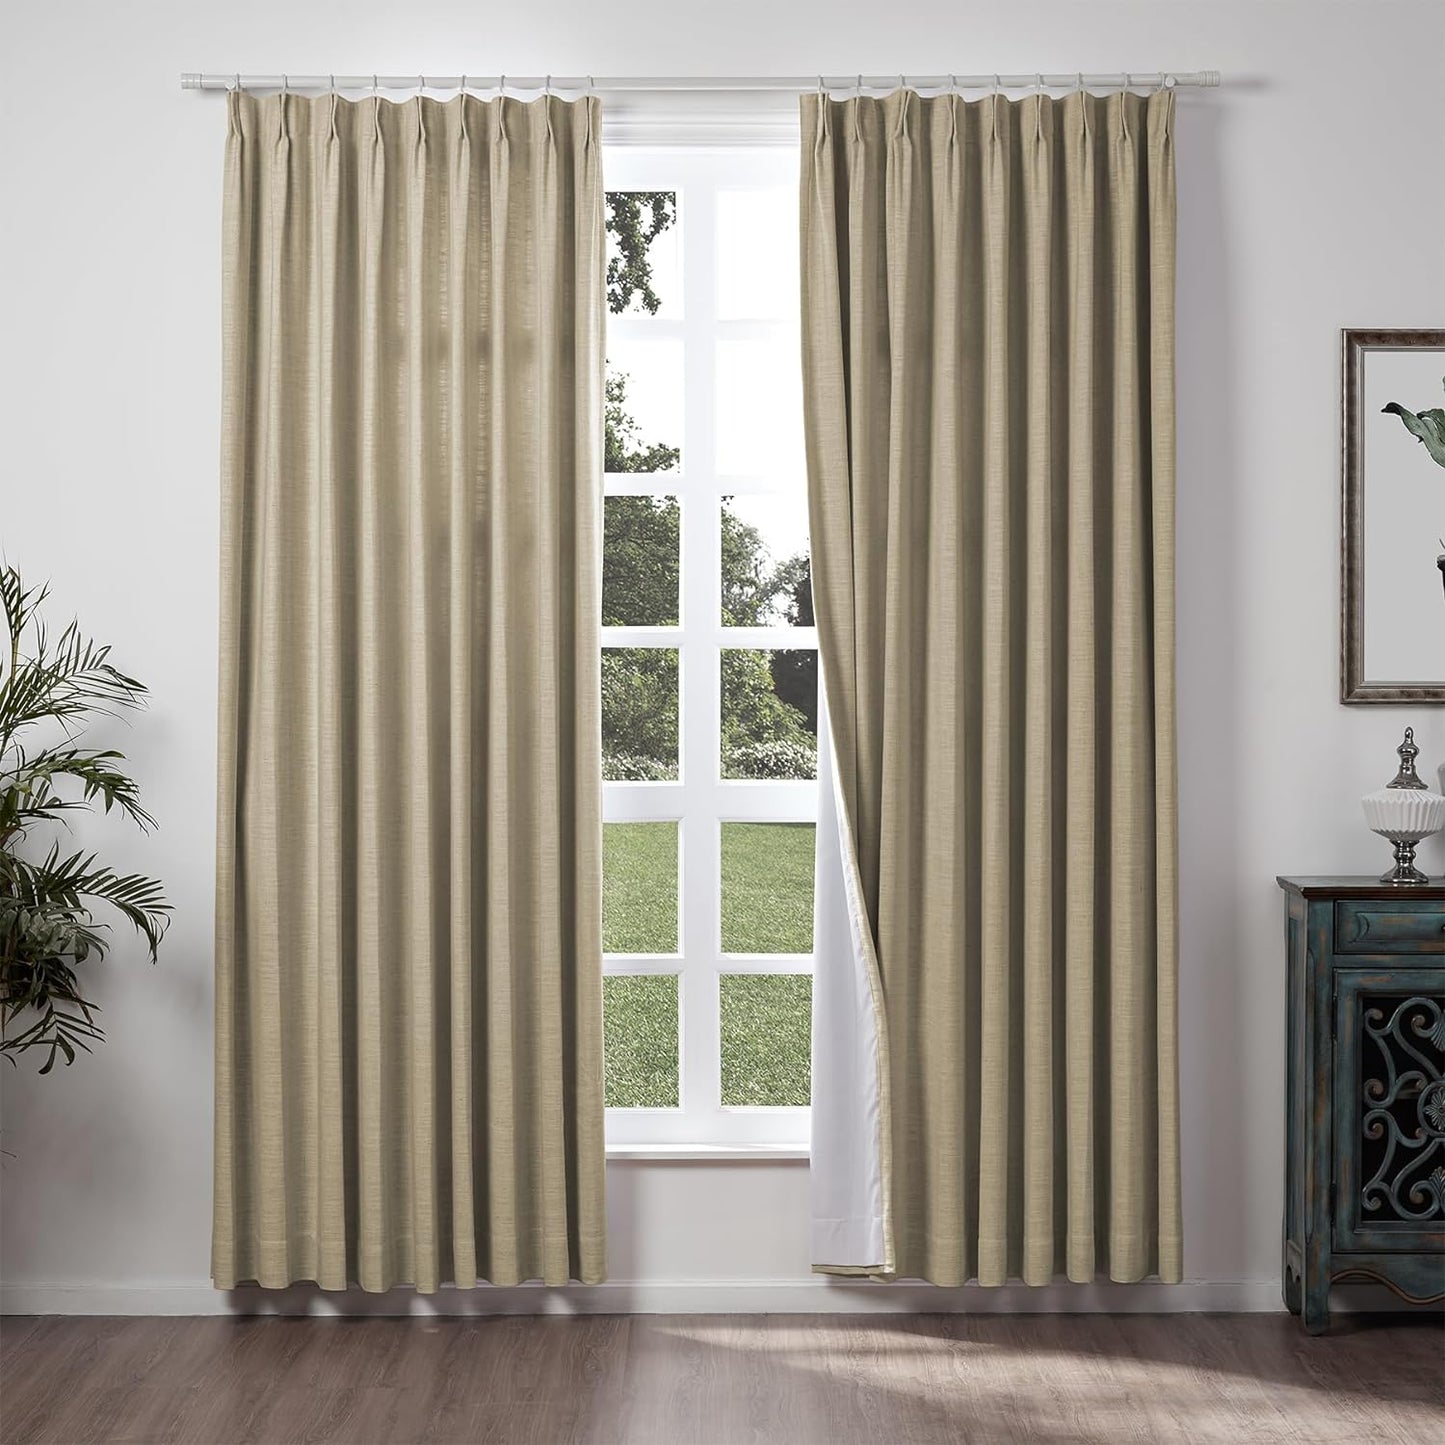 Chadmade 50" W X 84" L Polyester Linen Drape with Blackout Lining Pinch Pleat Curtain for Sliding Door Patio Door Living Room Bedroom, (1 Panel) Beige White Liz Collection  ChadMade Taupe Grey (8) 84Wx96L 